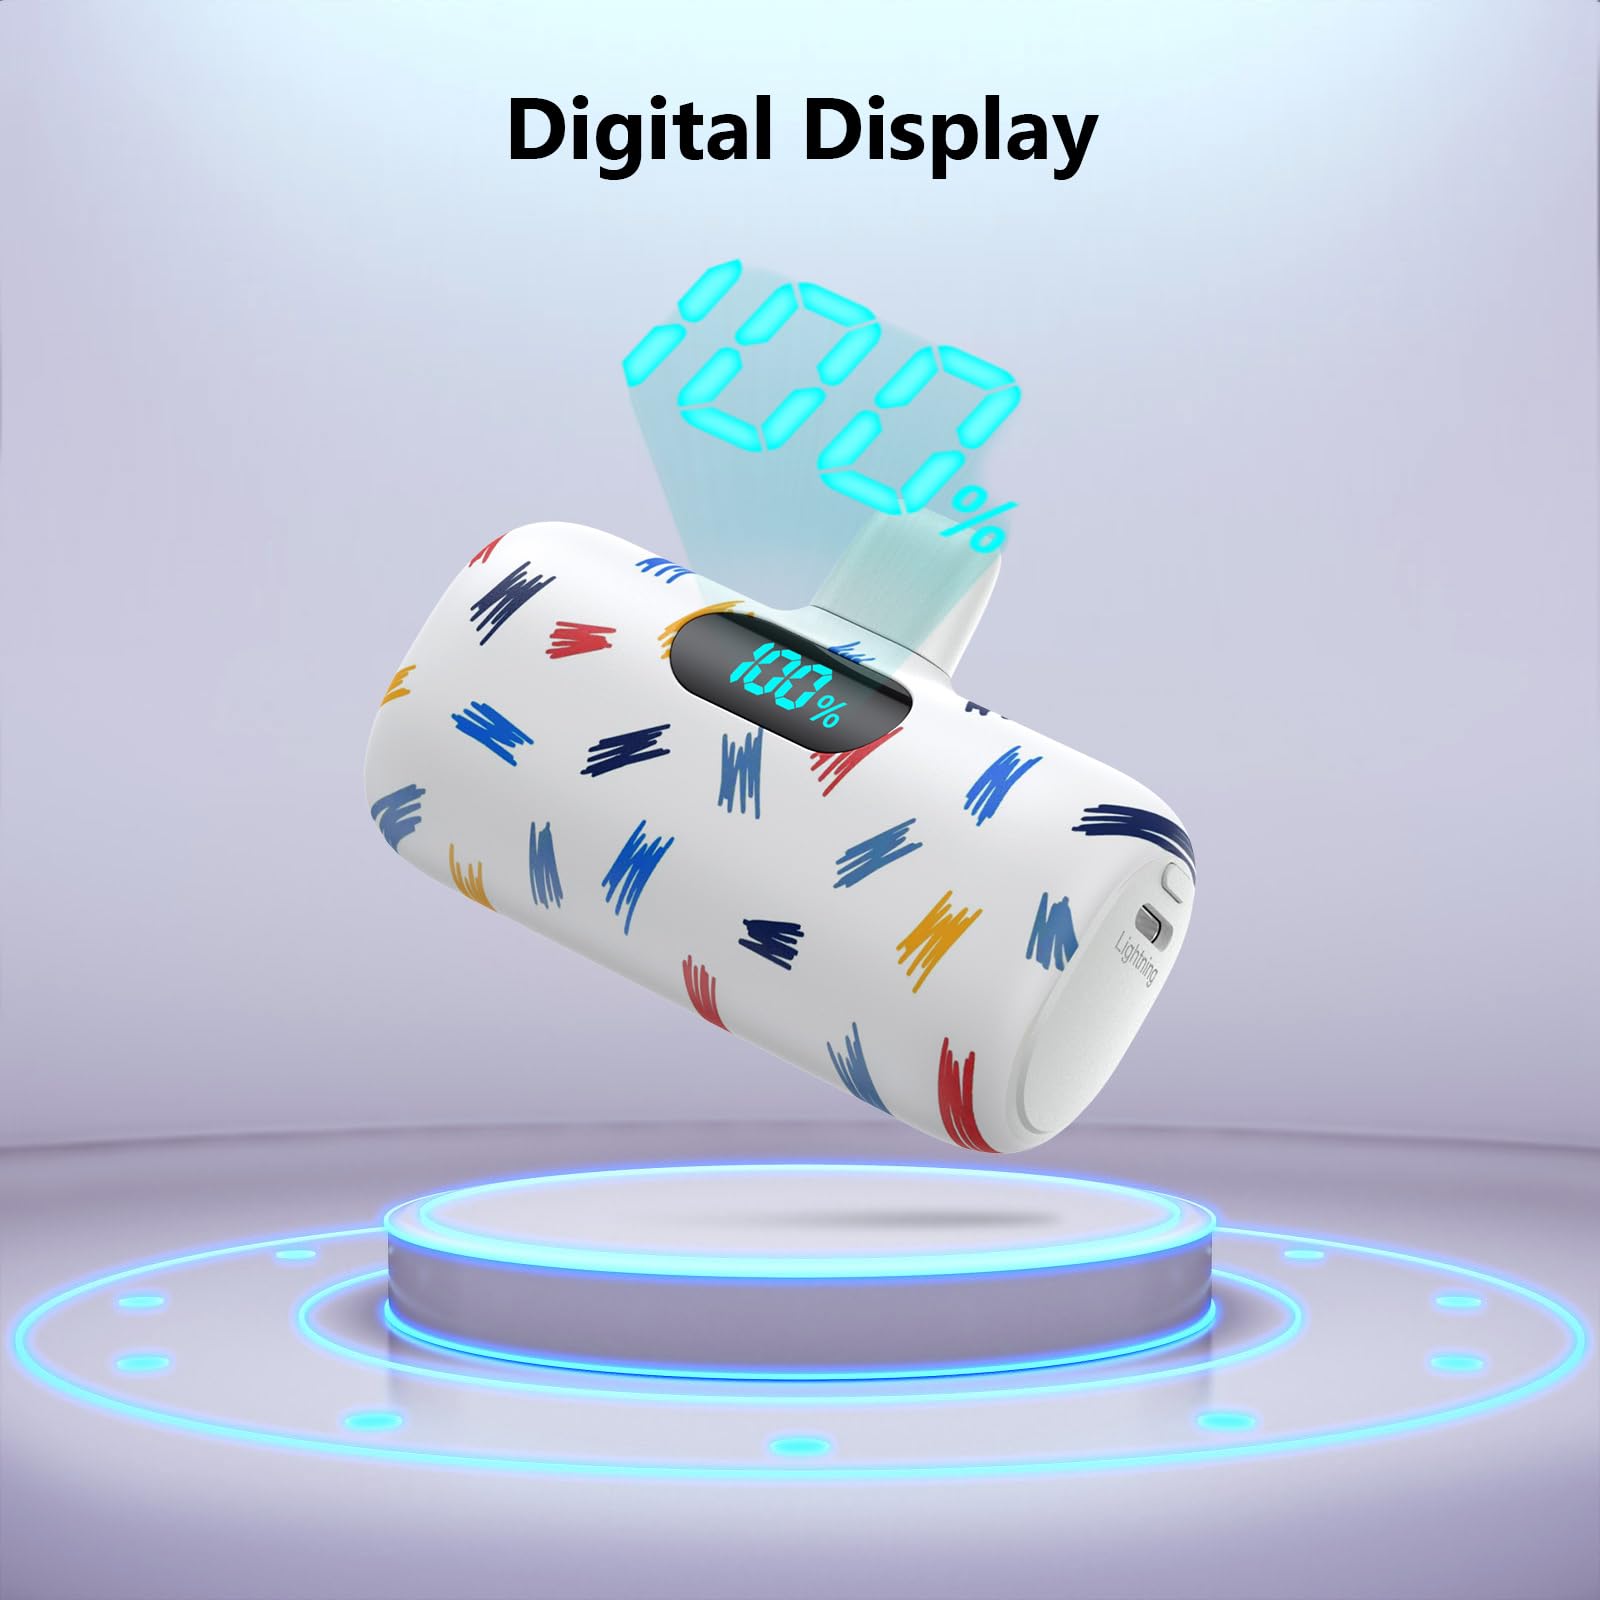 Small Portable Charger for iPhone,5000mAh Colorful Mini Power Bank,PD Fast Charging Portable Phone Charger,LCD Display Cute Battery Pack Compatible with iPhone 14/14 Pro Max/13 Pro/12/11/X/8/7/6 etc